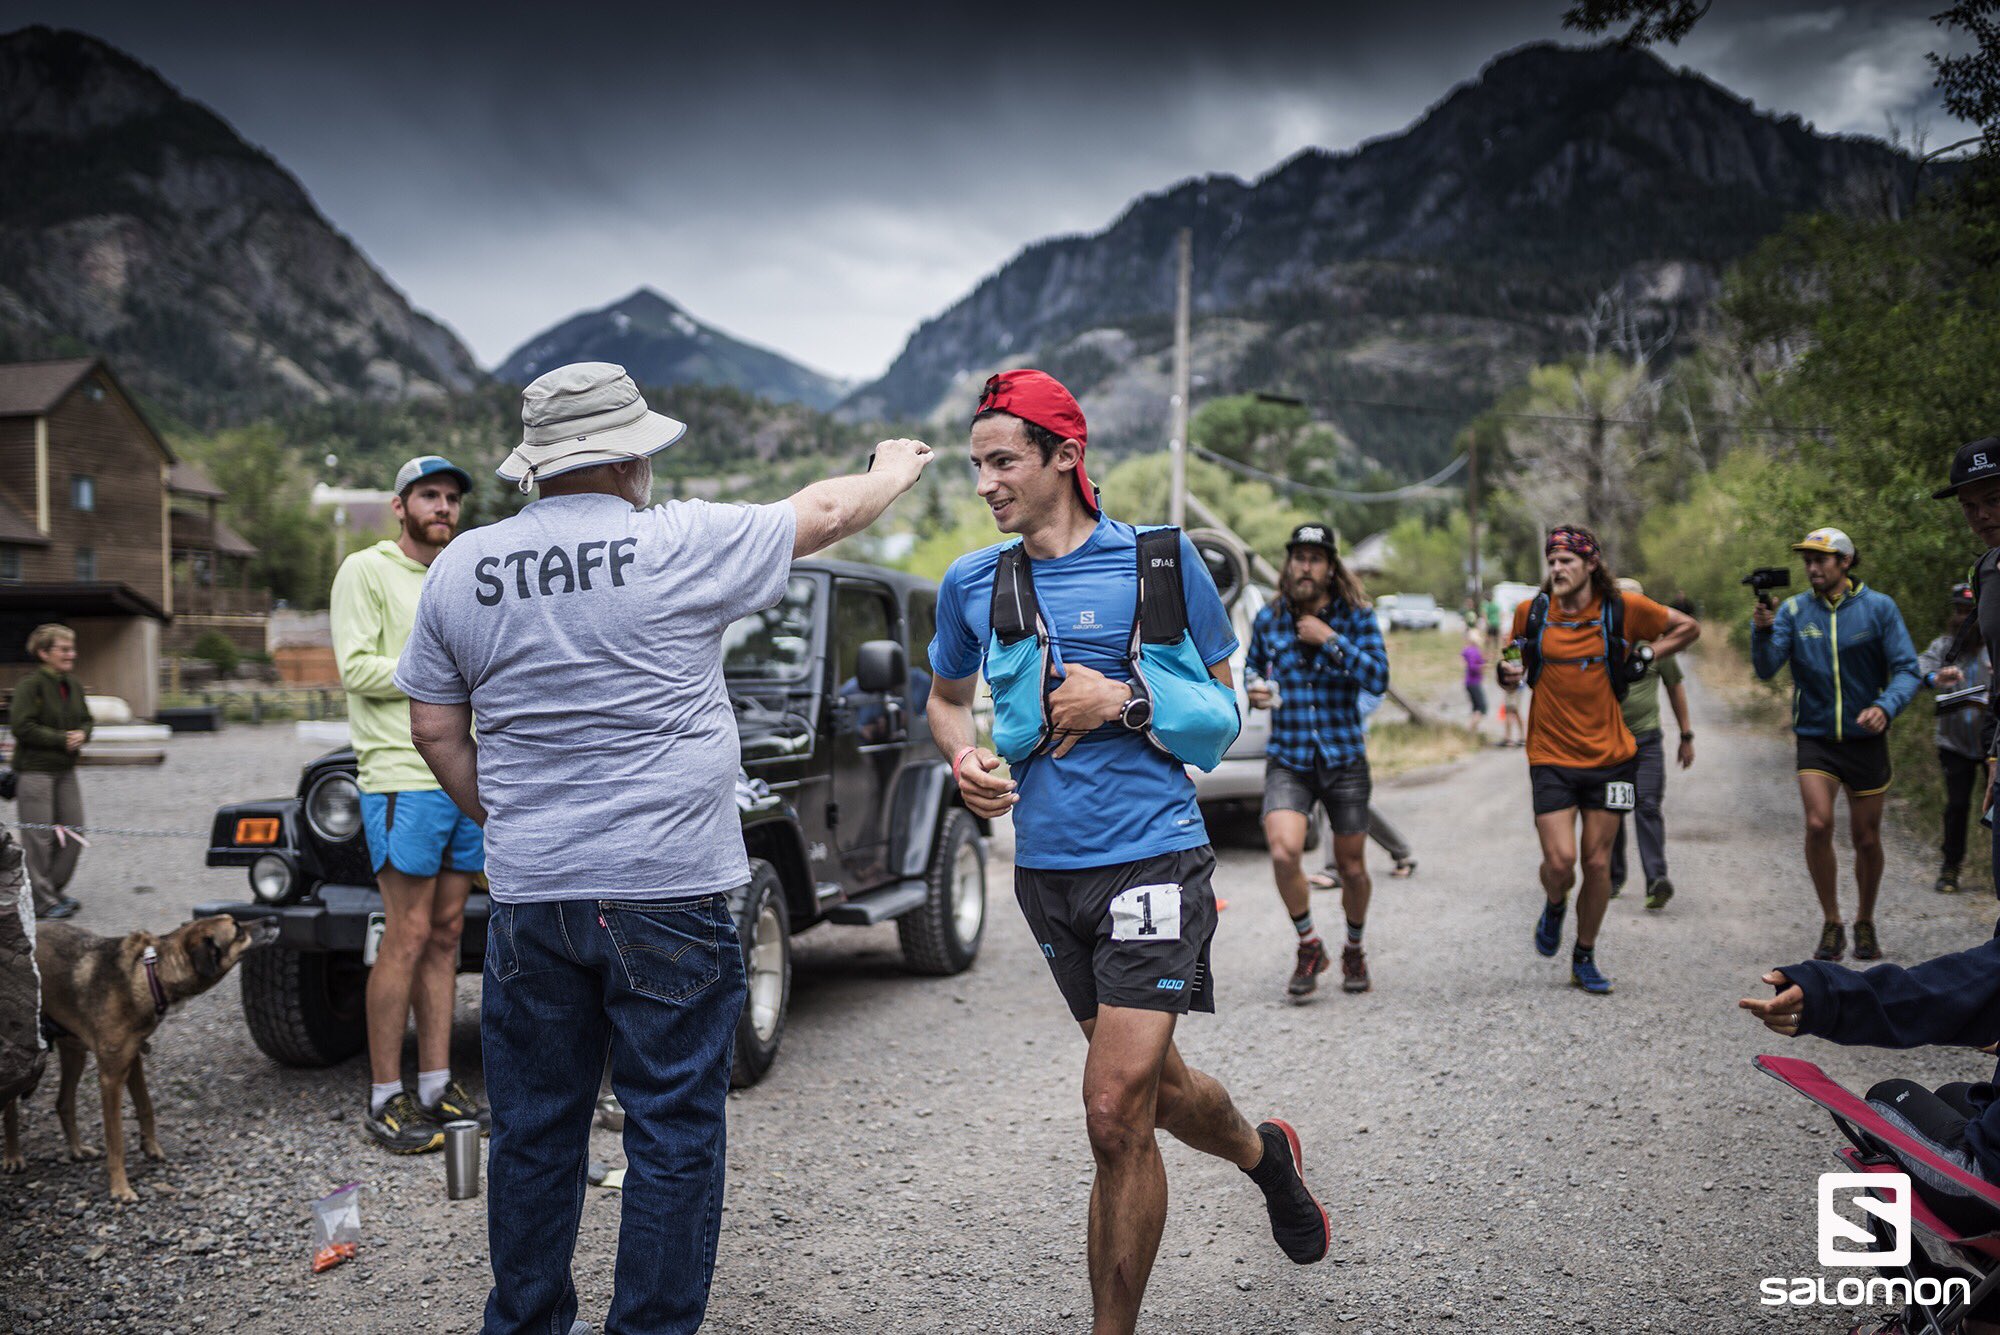 Salomon Running on Twitter: "After 90 Miles this guy is still leading  #HR100 with his arm in a sling. Can he pull off an extraordinary win? 📷  @jsaragossa https://t.co/4o9D9fpM58" / Twitter